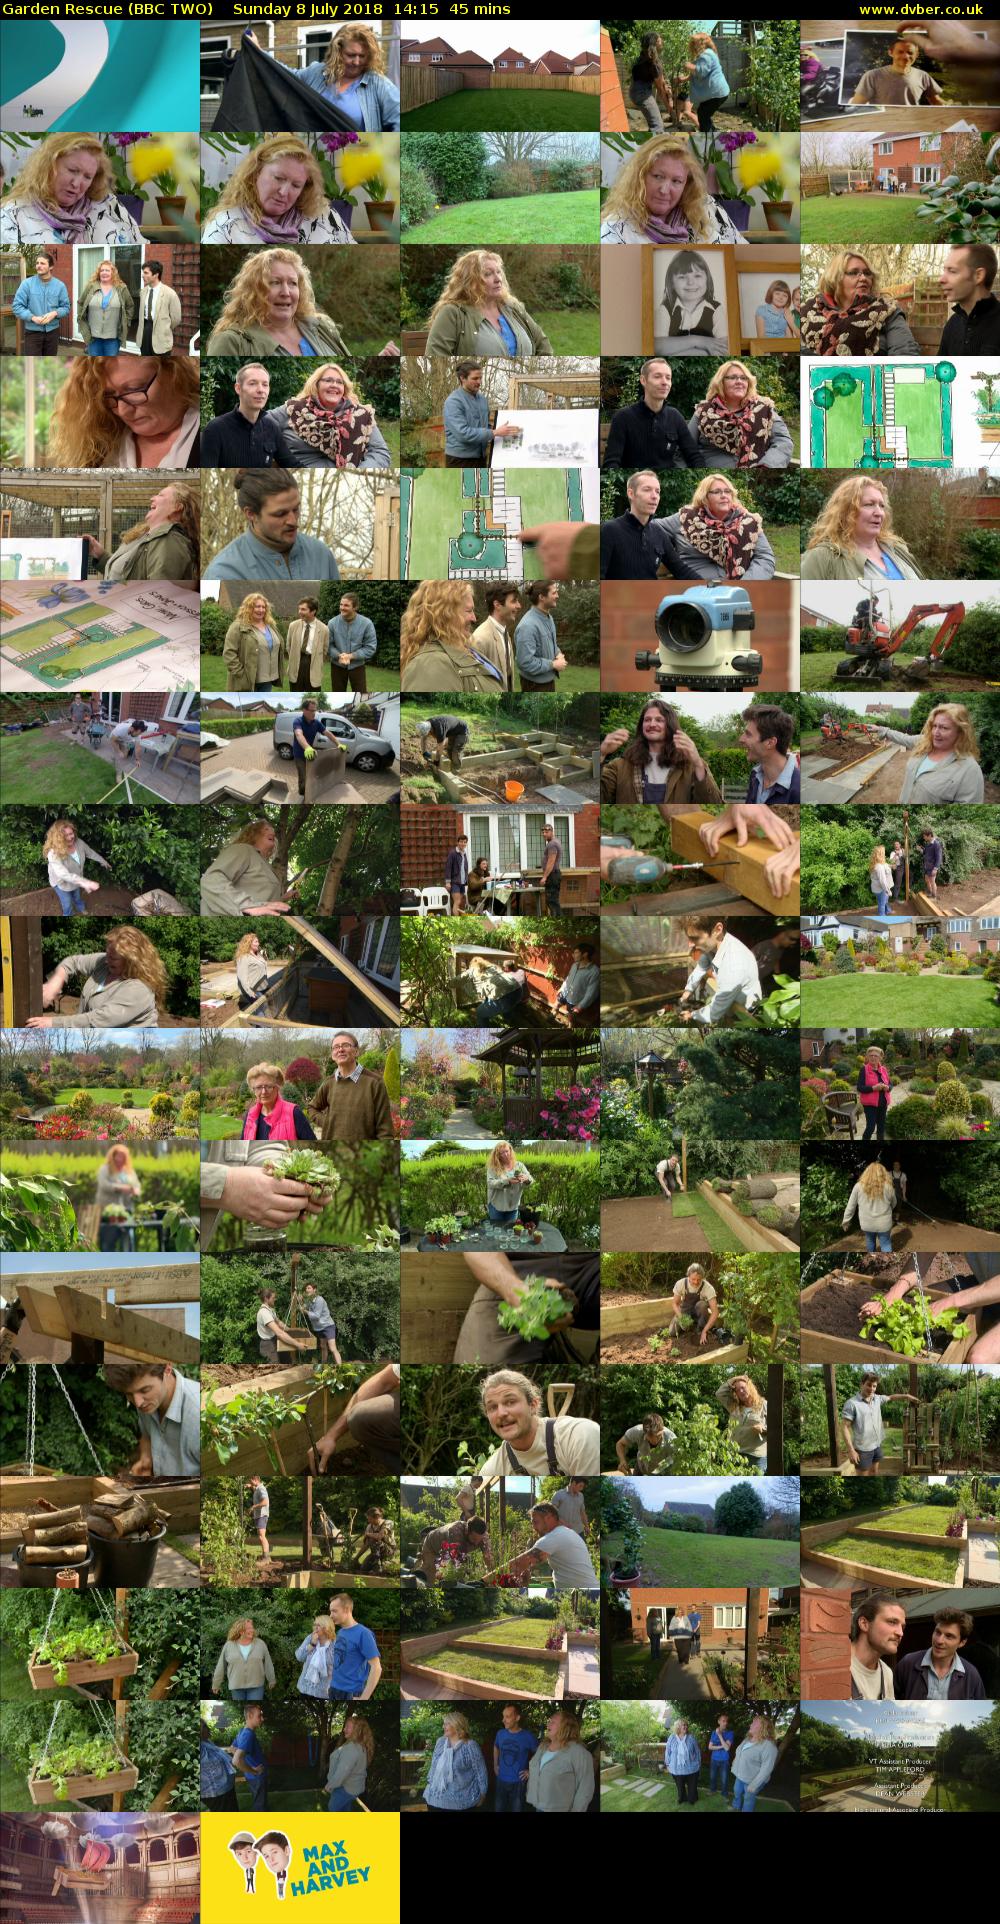 Garden Rescue (BBC TWO) Sunday 8 July 2018 14:15 - 15:00